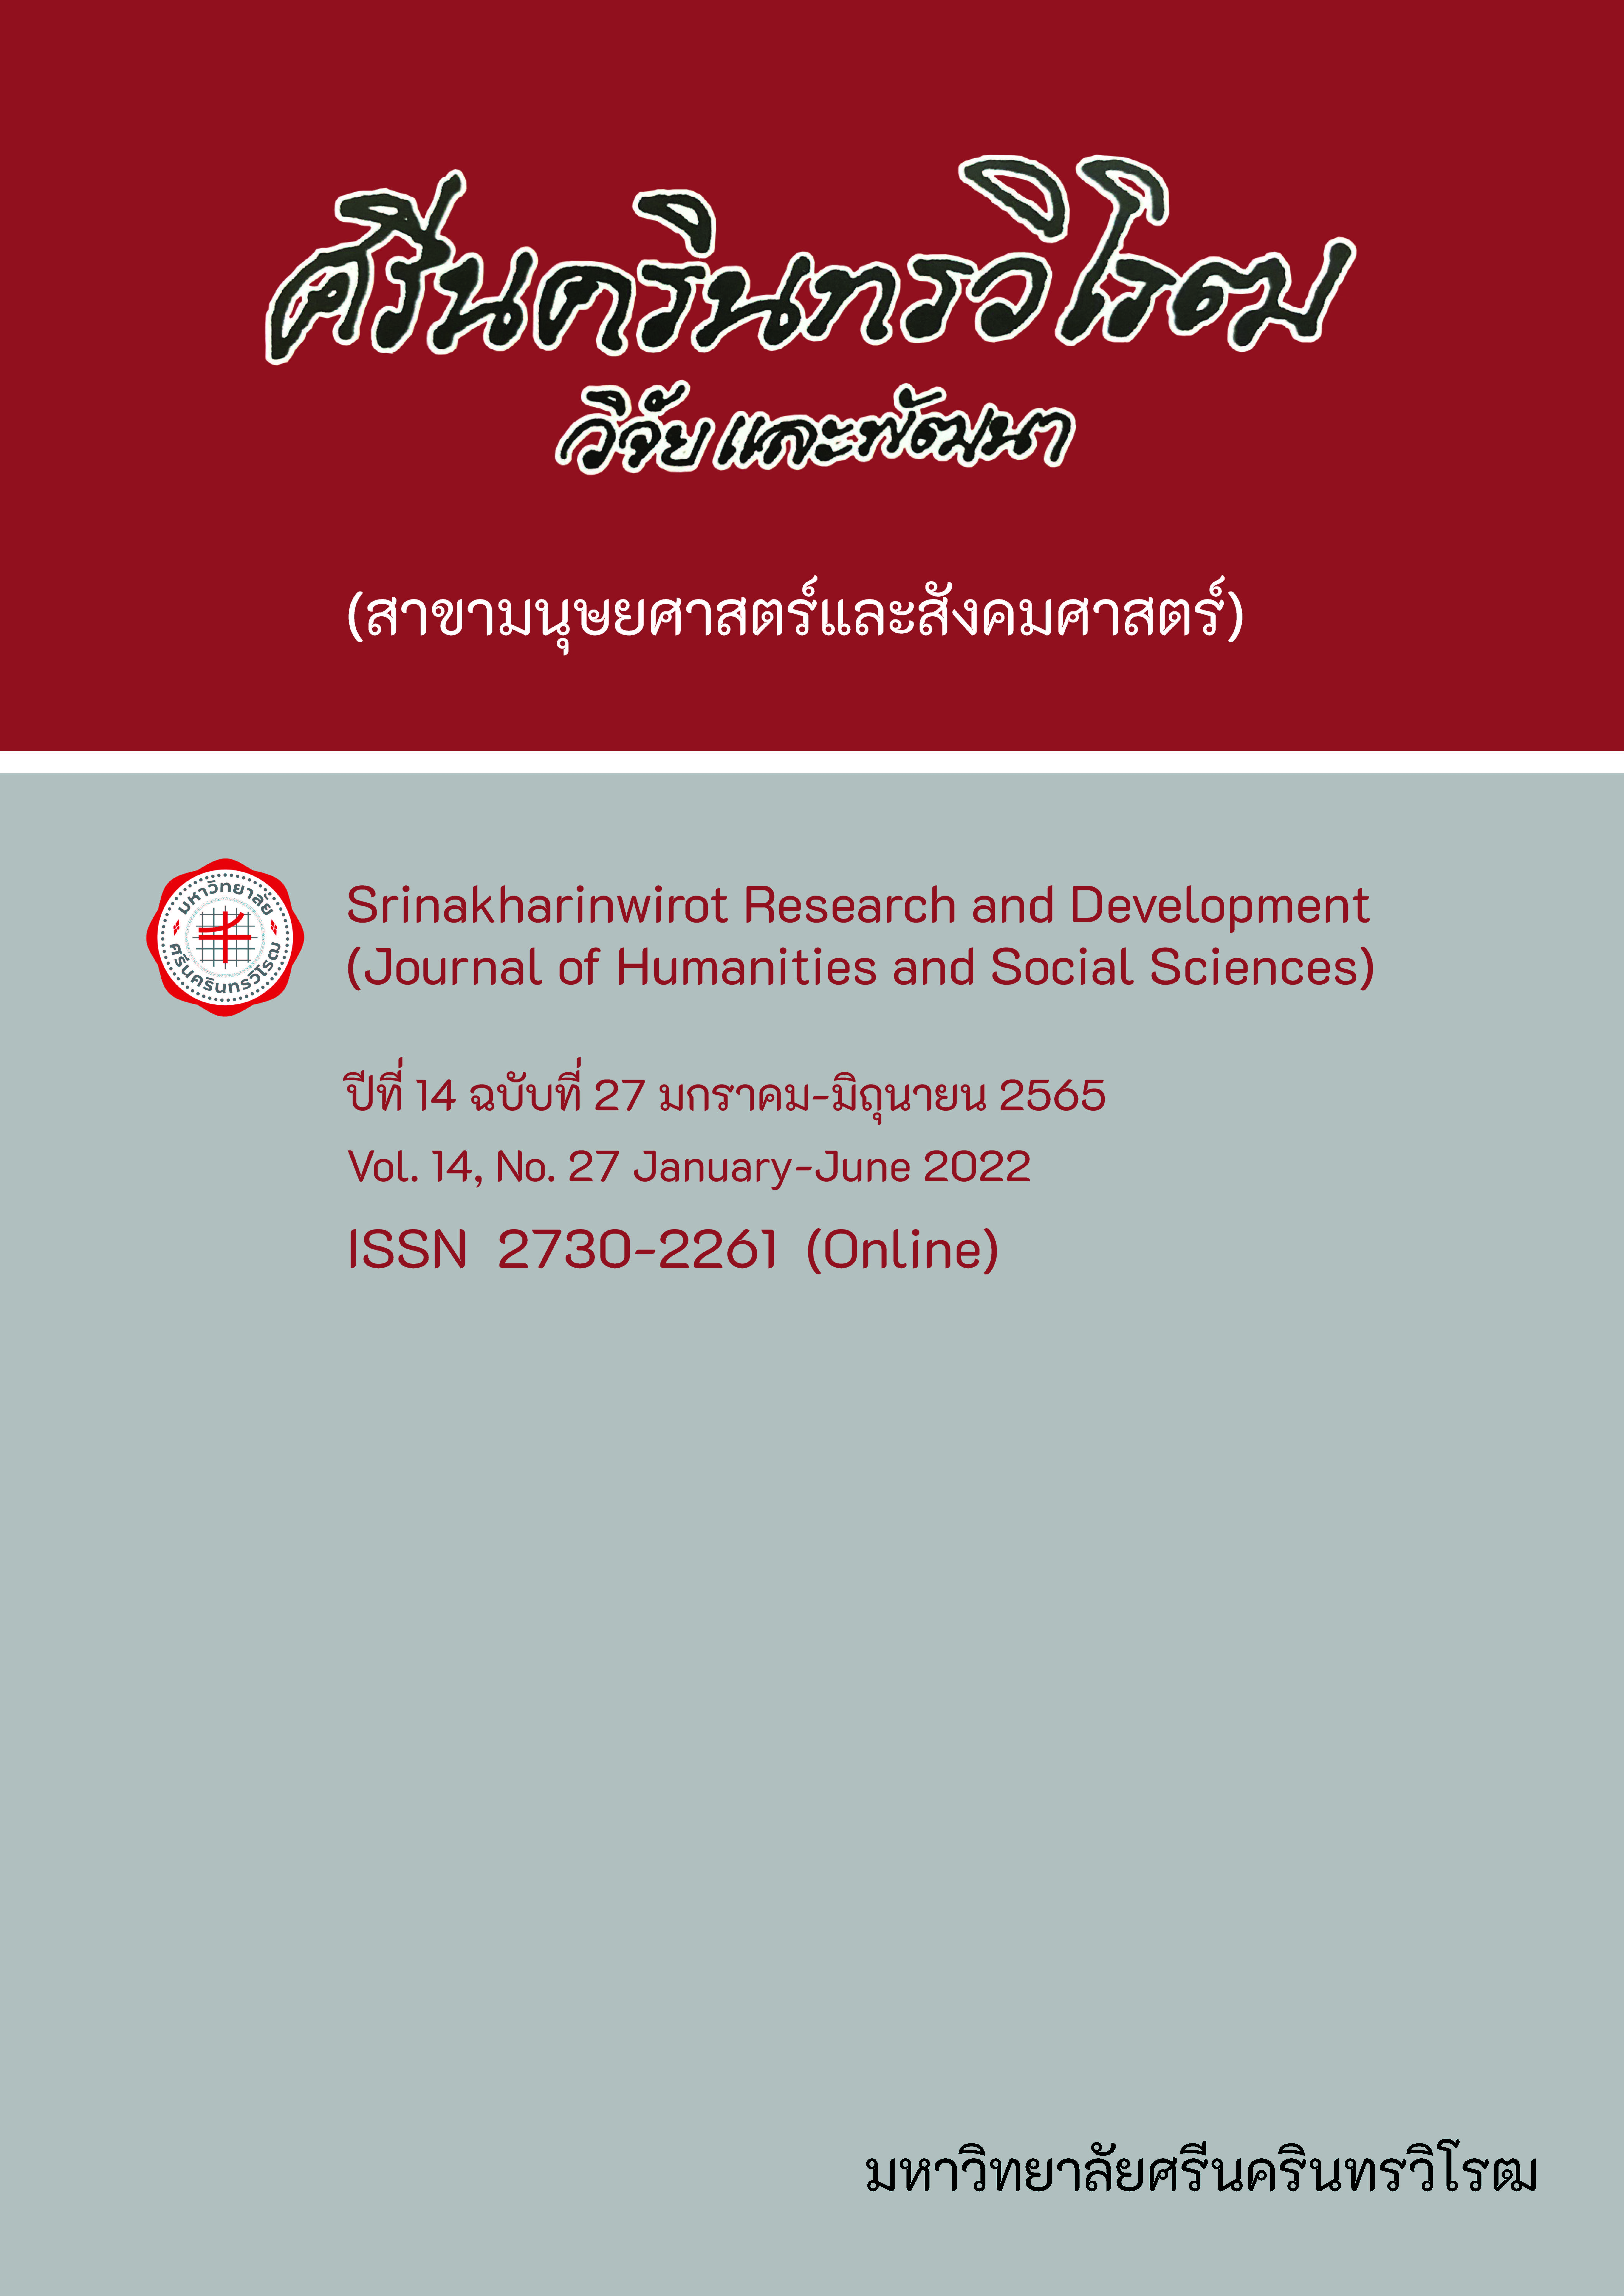 					View Vol. 14 No. 27, January-June (2022): Srinakharinwirot Research and Development (Journal of Humanities and Social Sciences)
				